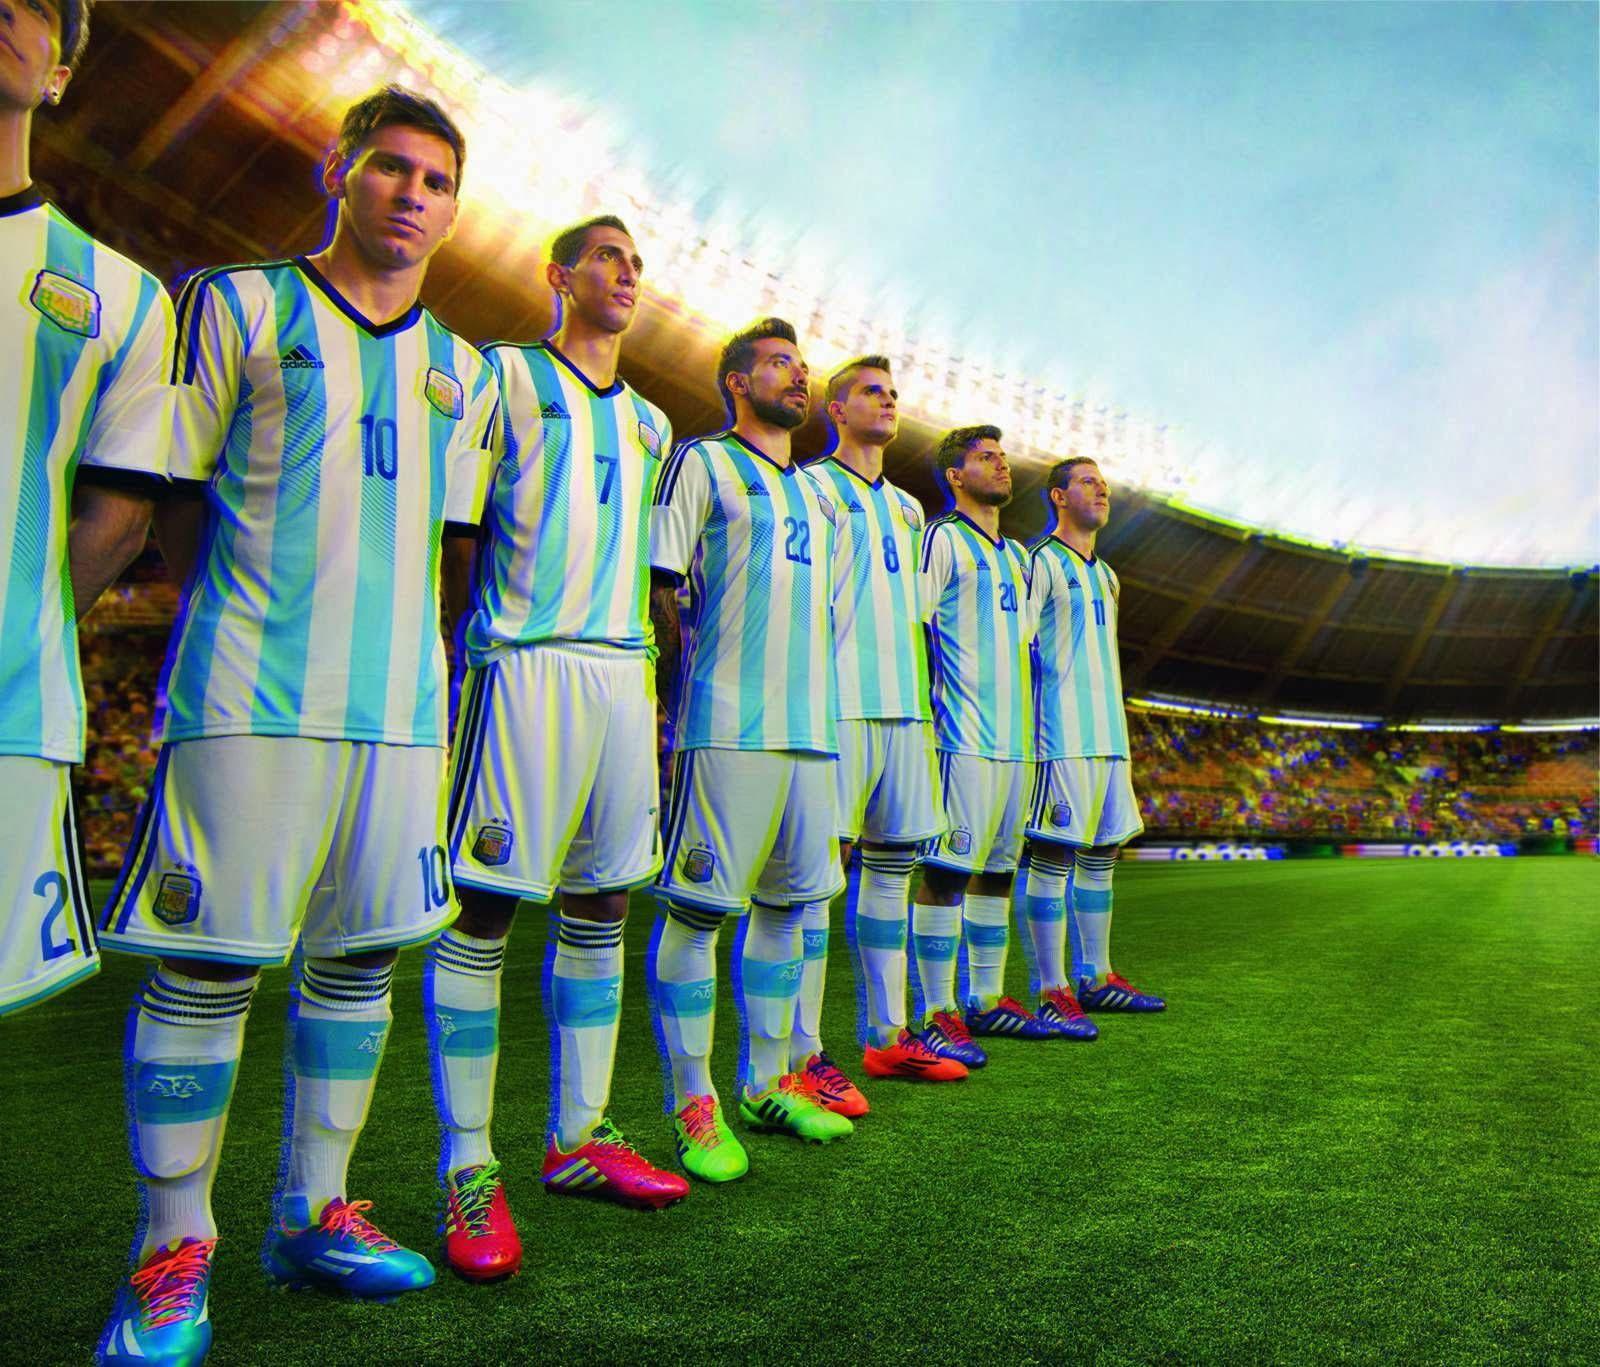 Argentina Page of Football Wallpaper HD 1920×1080 Argentina